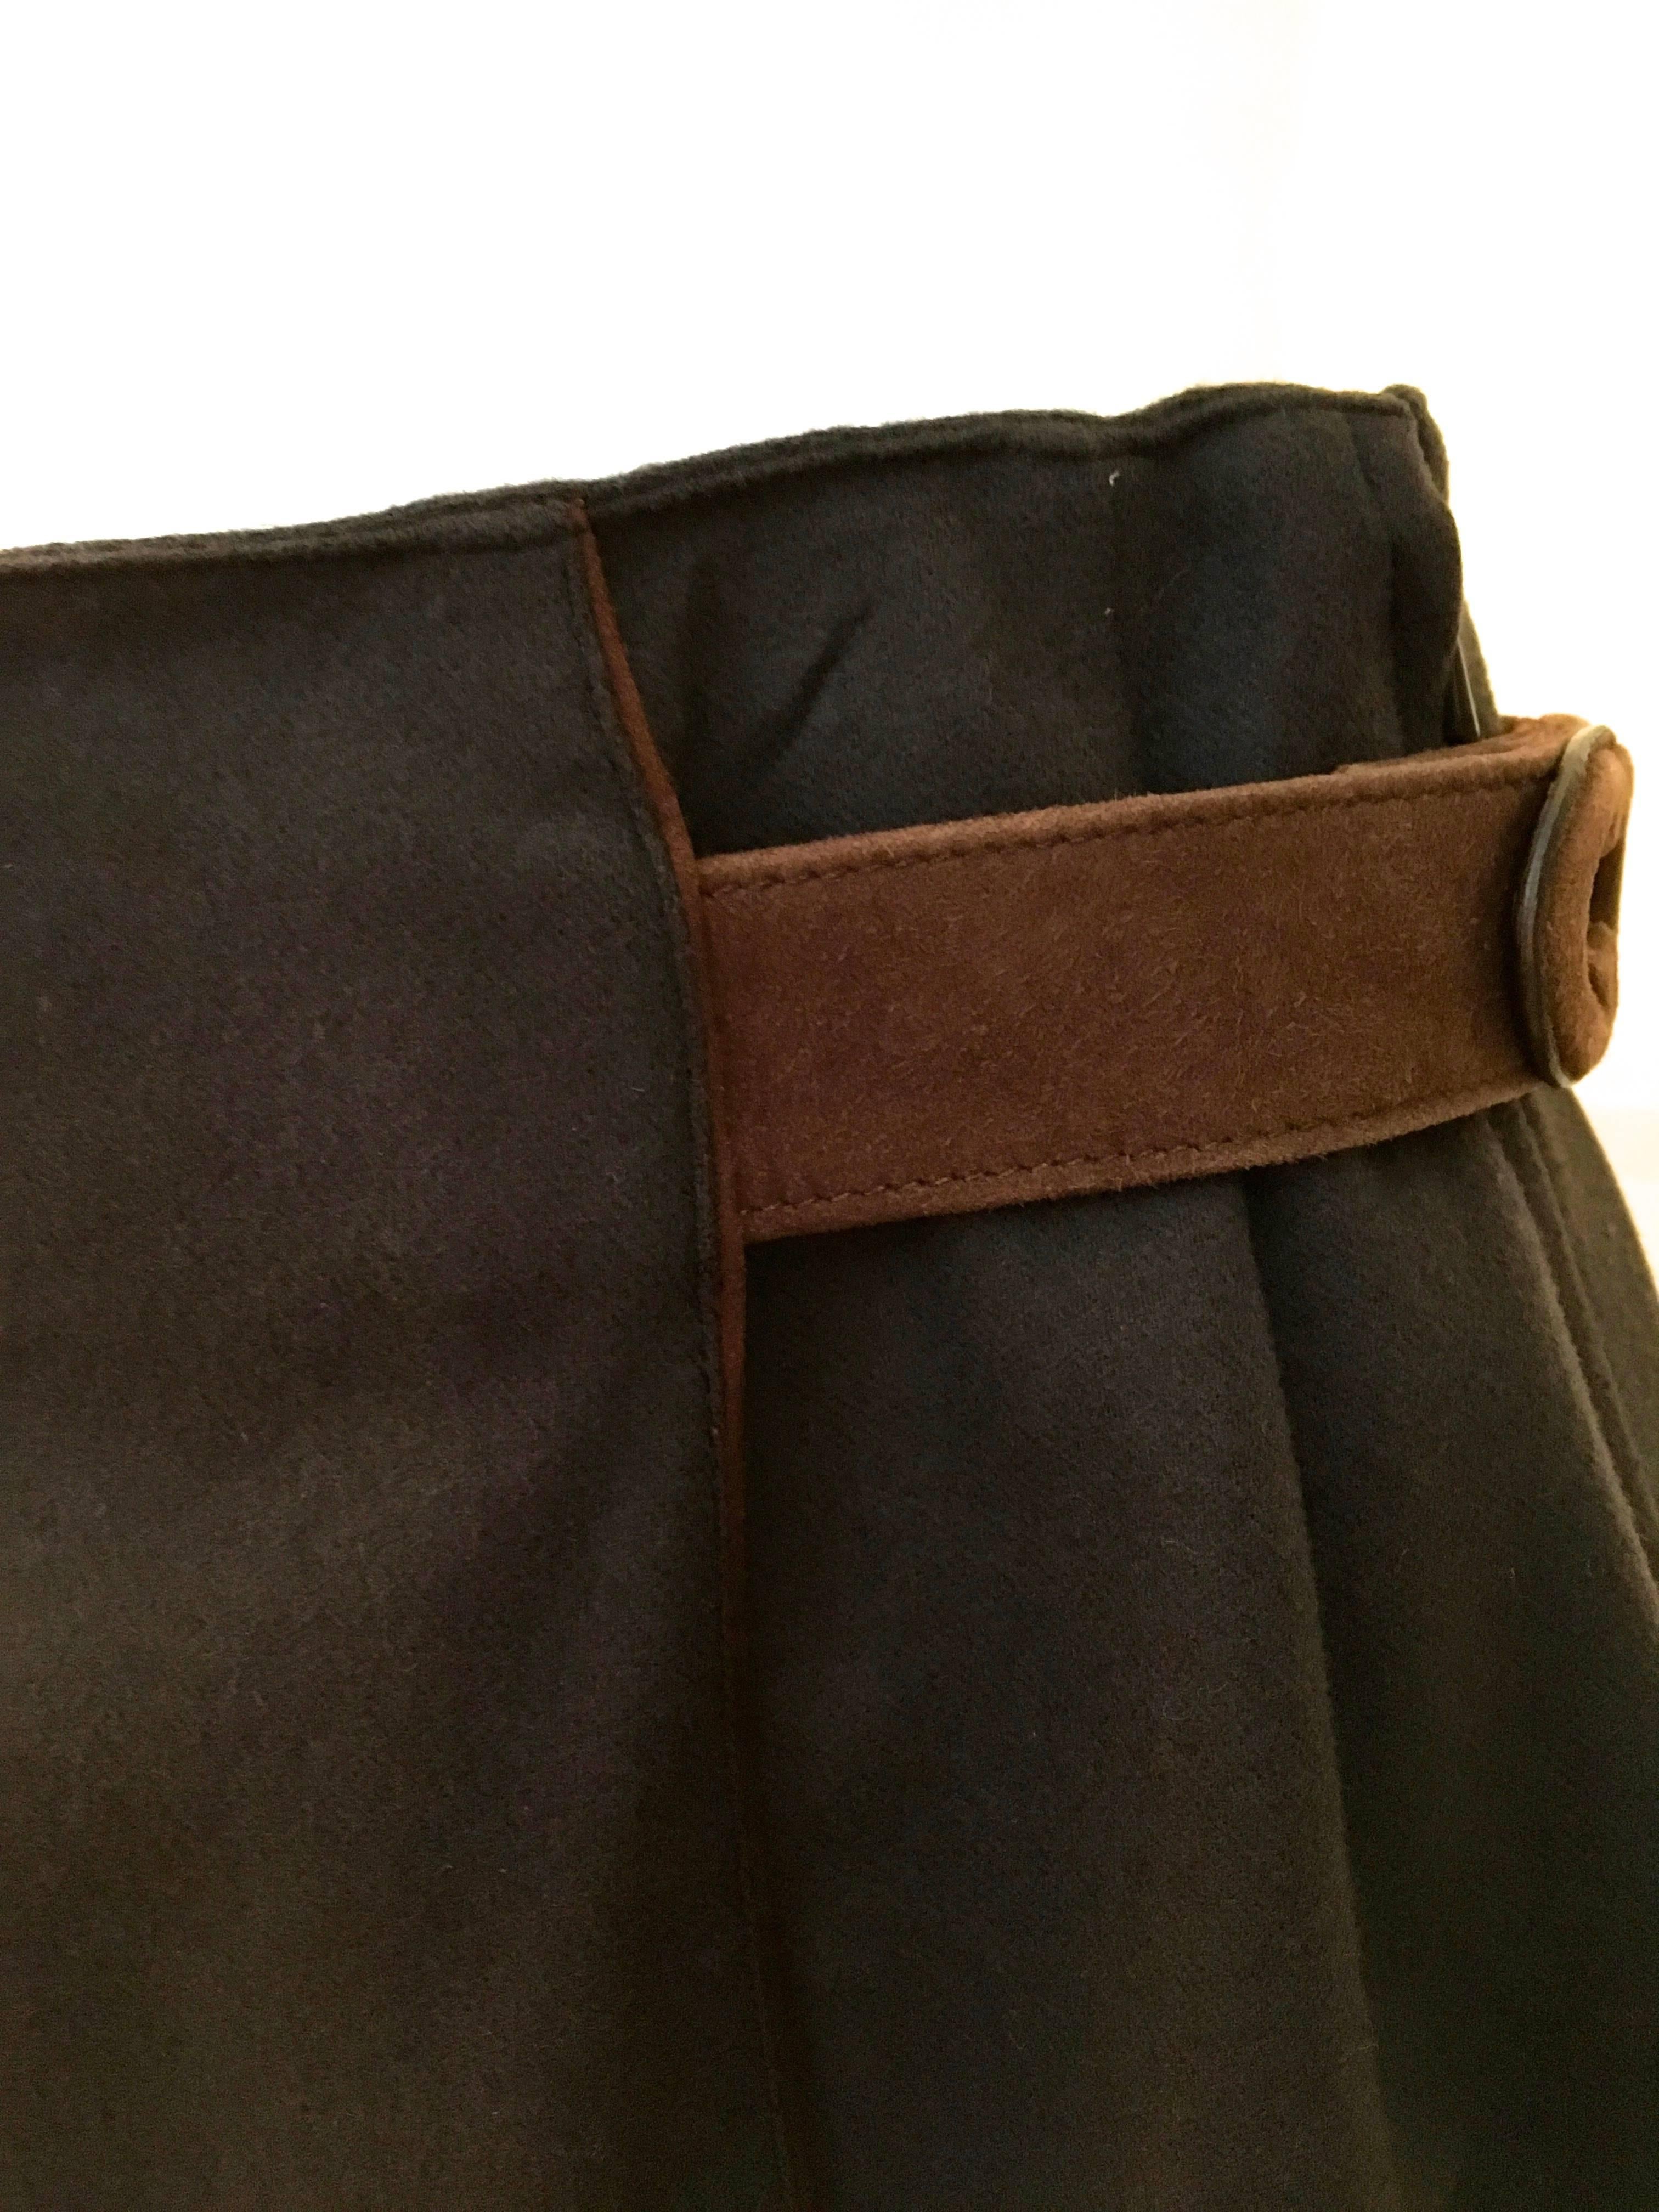 Black Gucci Skirt w/ Leather Belt - Rare For Sale